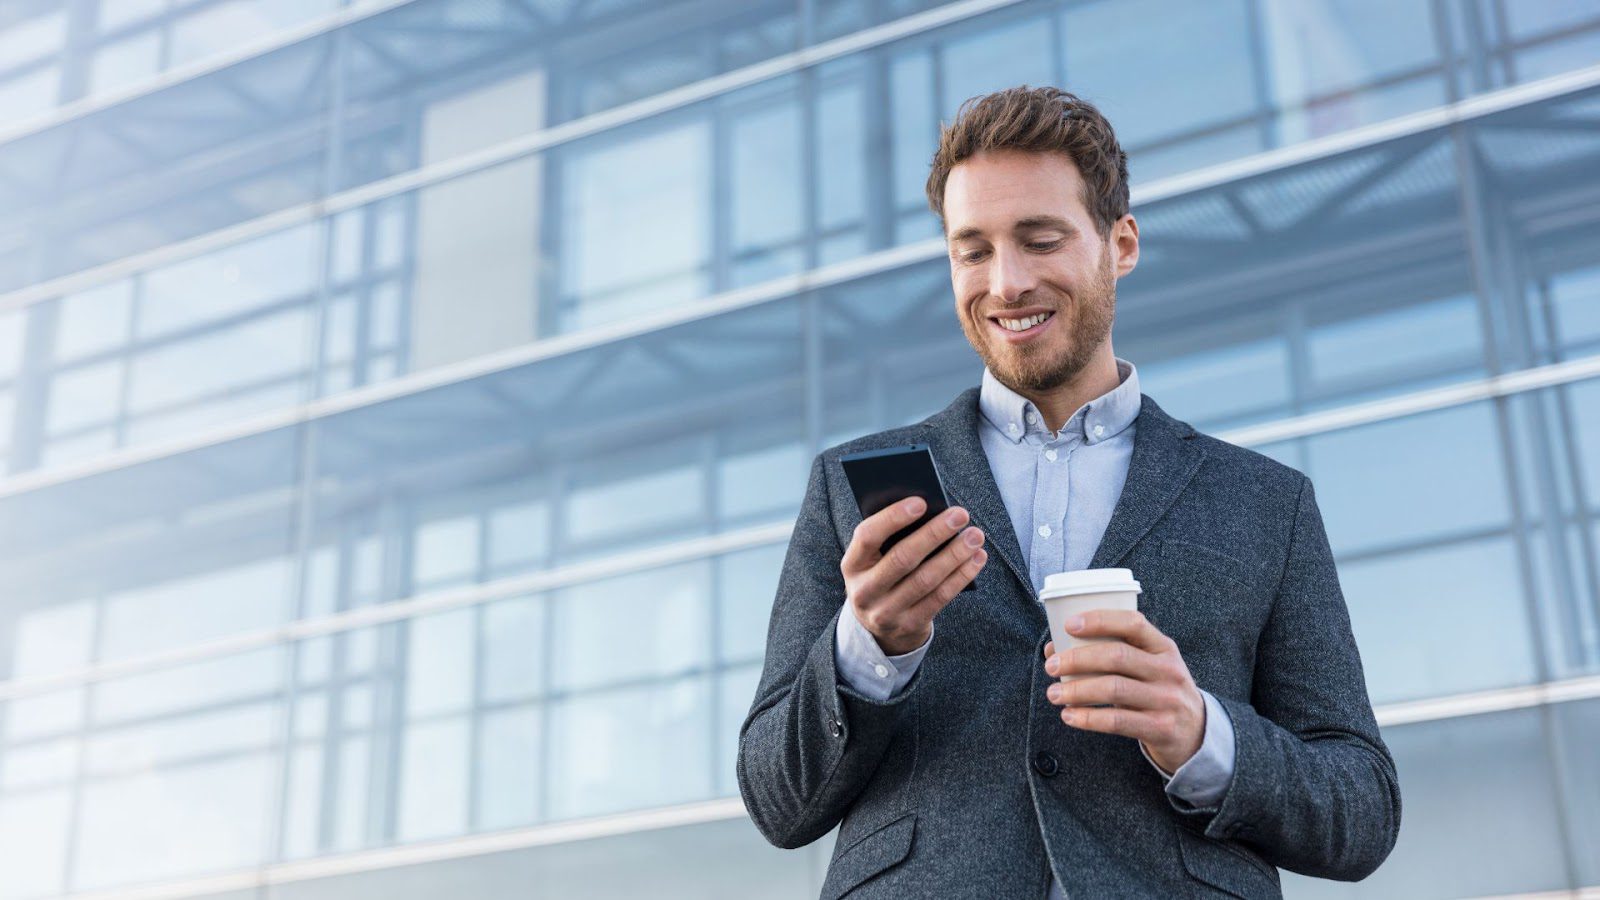 A smiling man in a smart casual outfit with a blazer and shirt, holding a mobile phone in one hand and a coffee cup in the other, standing in front of a modern glass building facade.